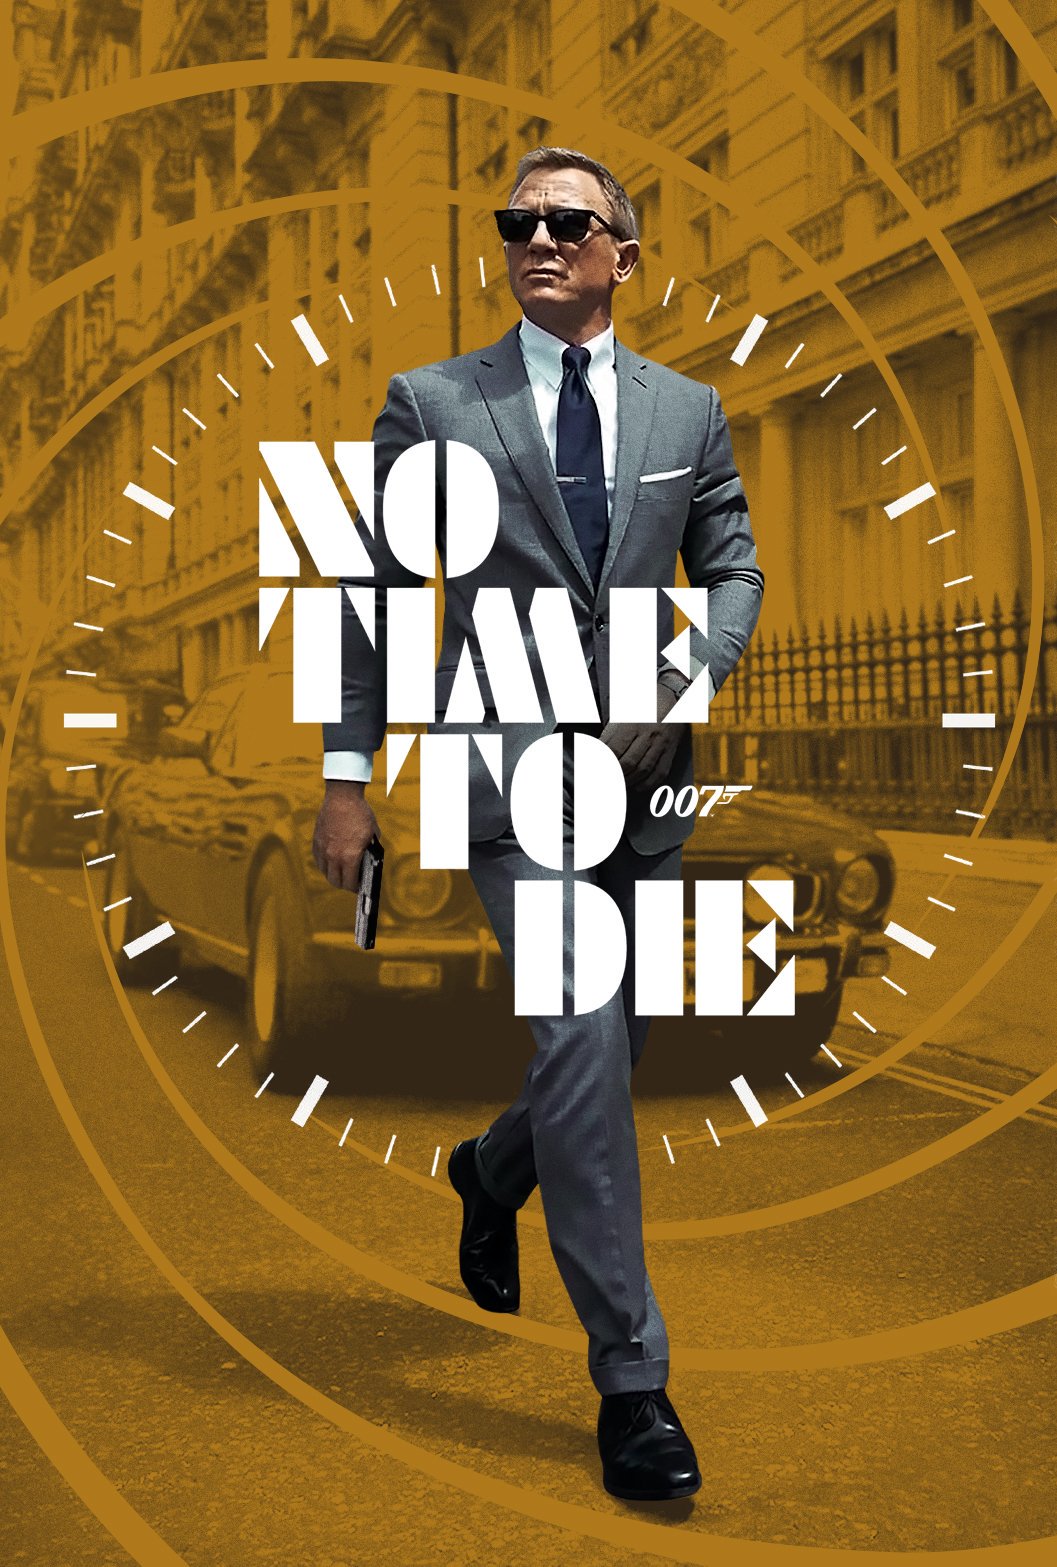 No Time To Die Hd Wallpapers 7wallpapers Net